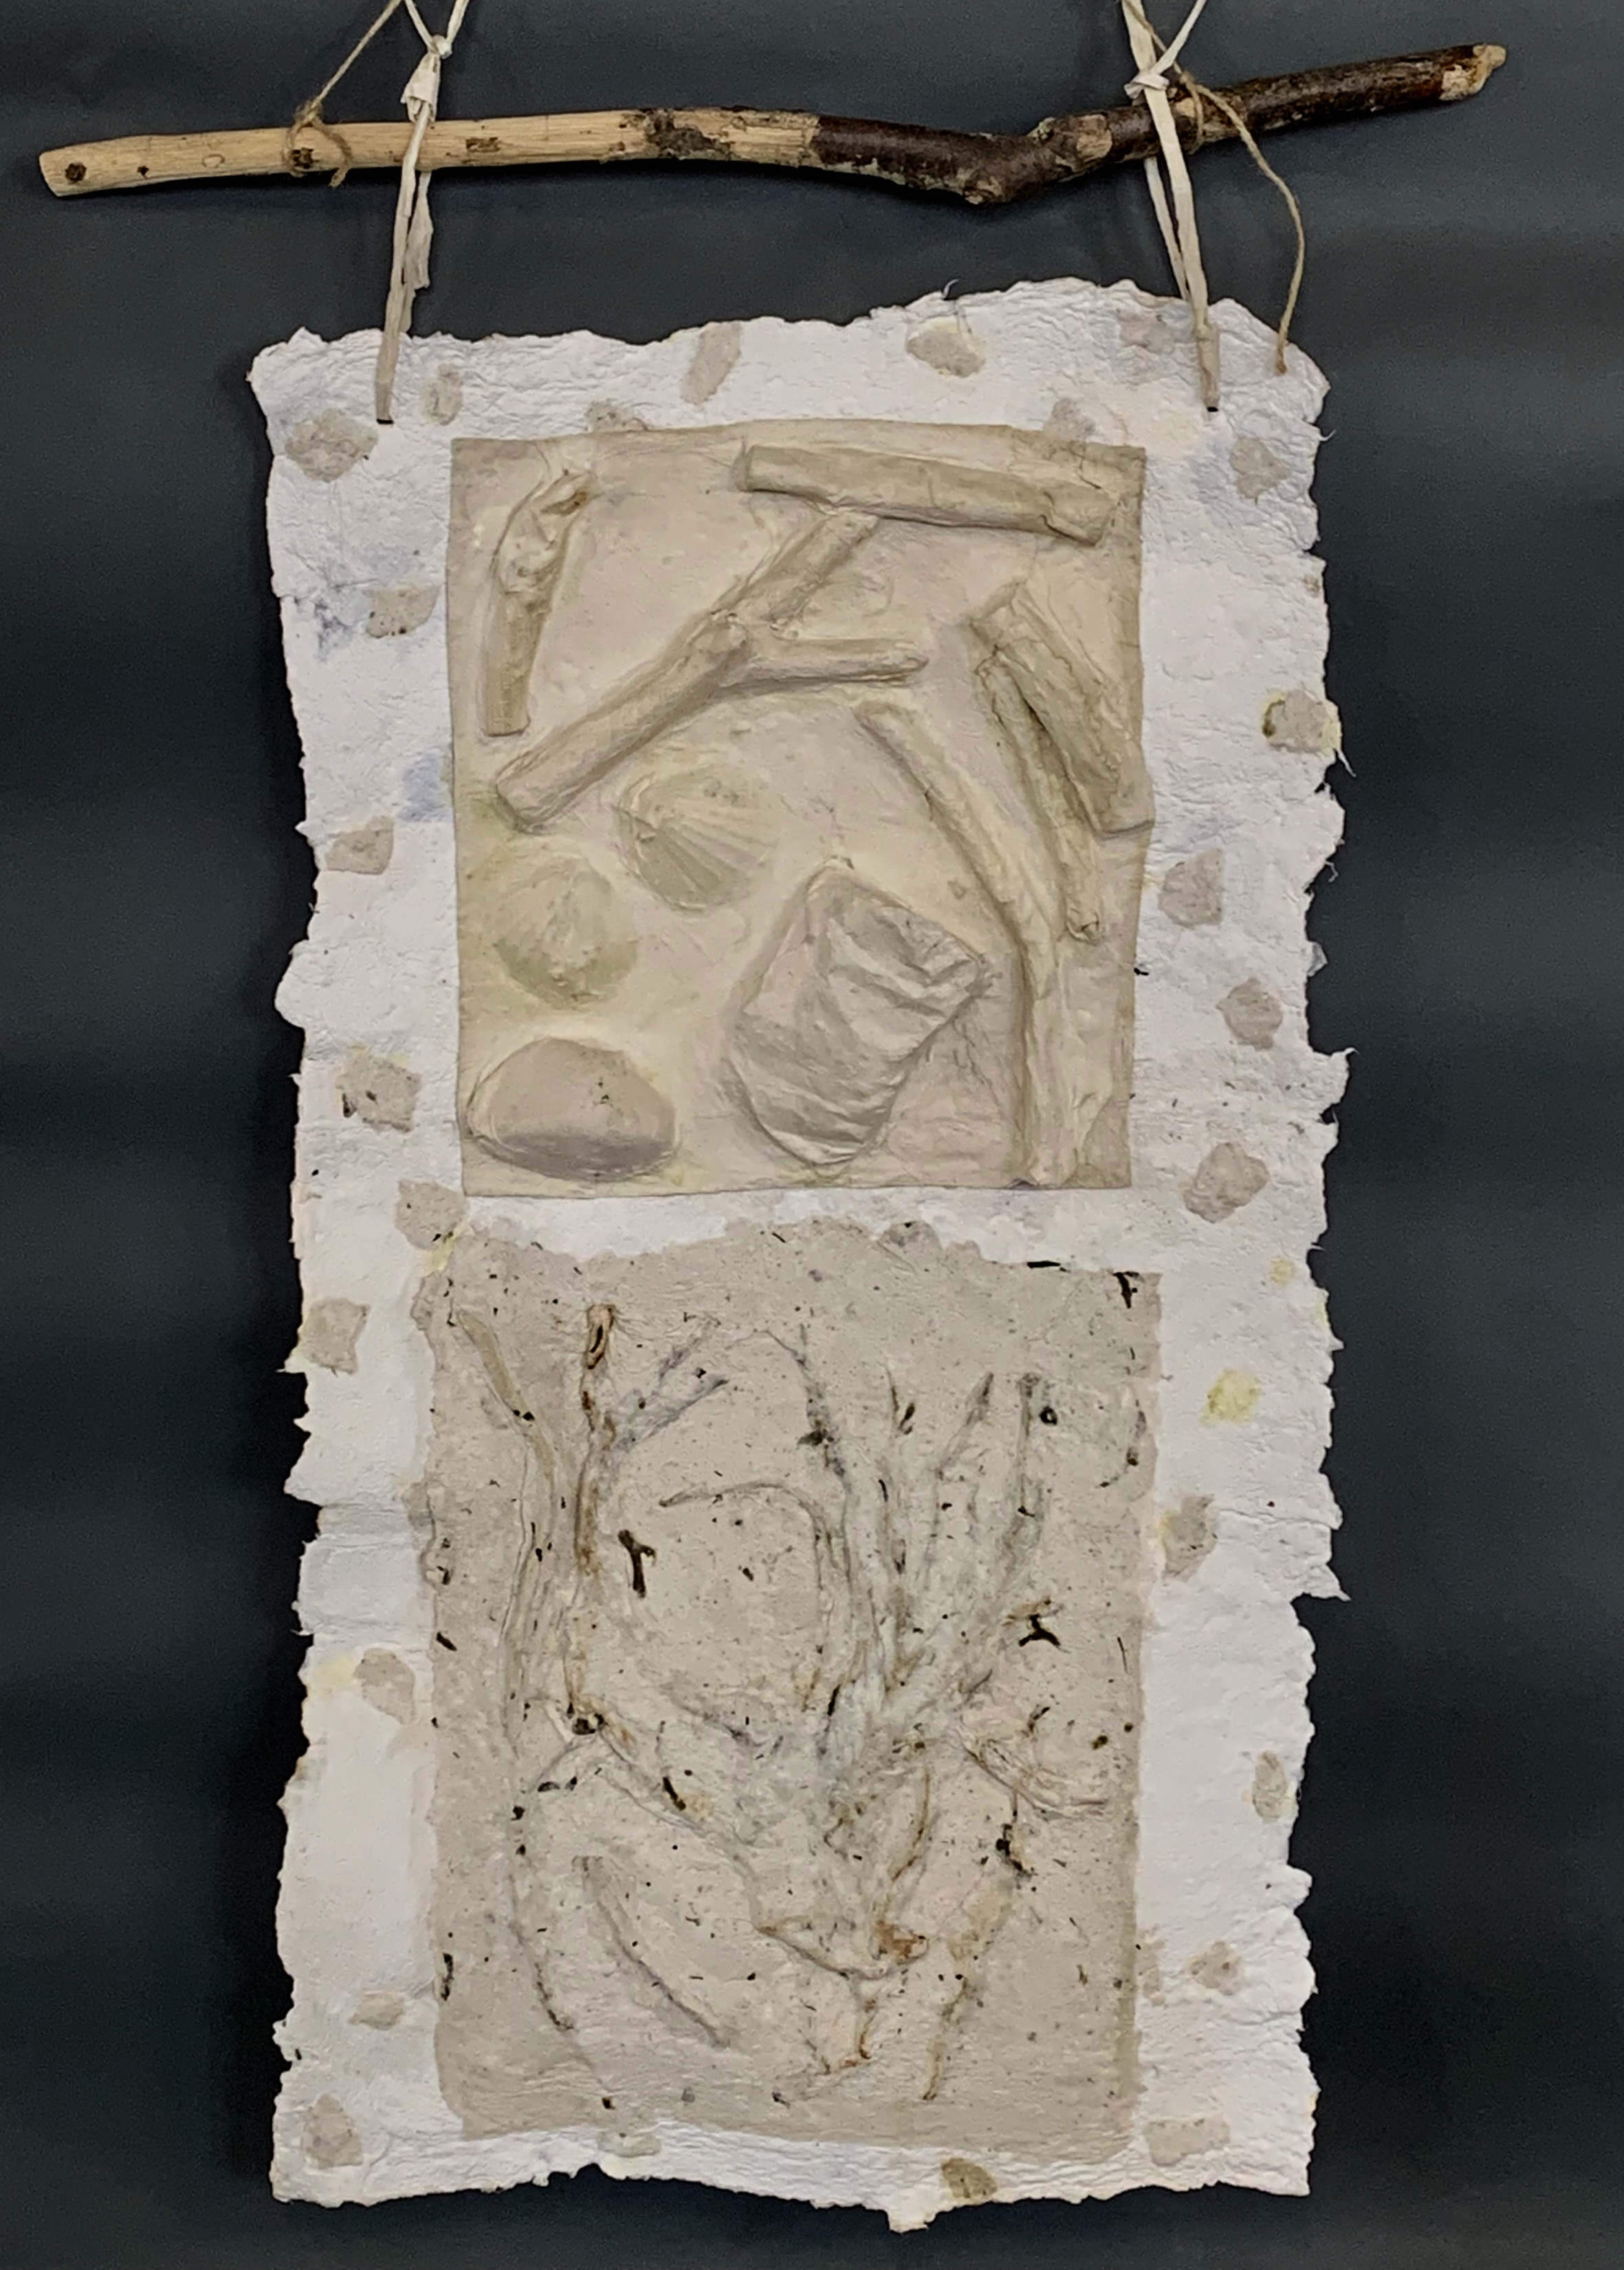   Untitled   .    Relief with branches imbedded in hand made paper from seaweed, cotton, and abaca. 2019 